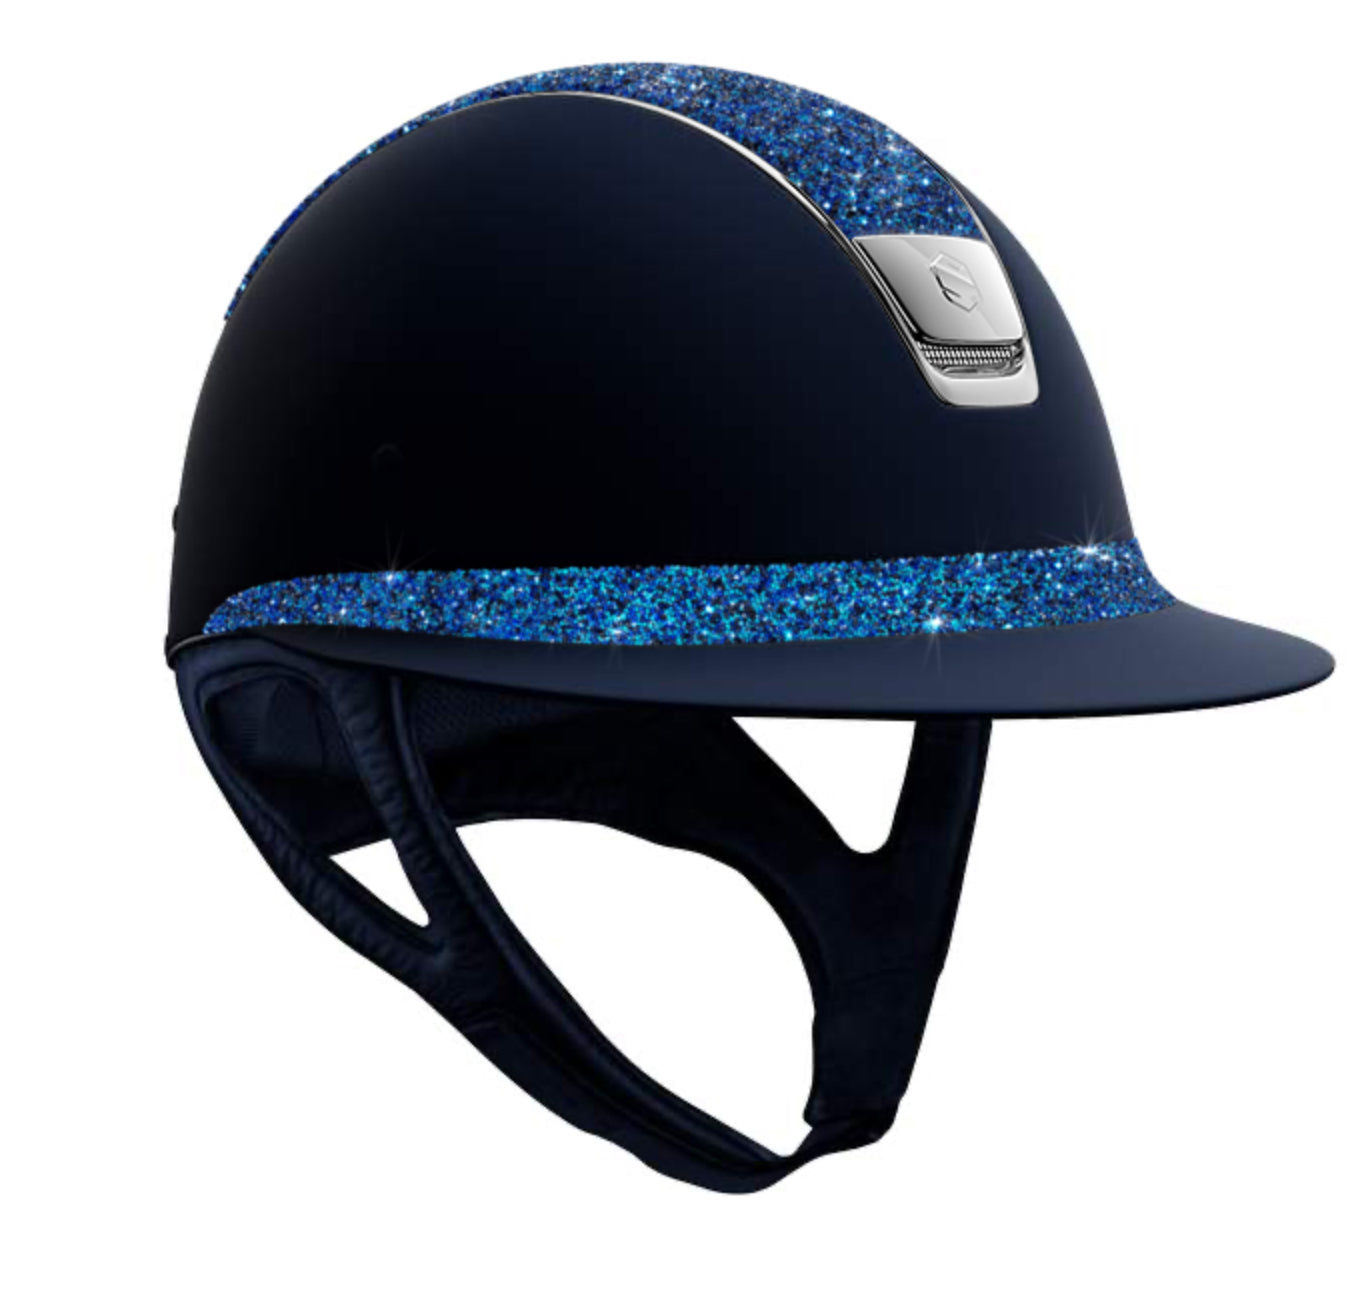 The New In Miss Shield Shadowmatt riding hat with silver chrome trim. Finished with Bermuda blue ultra fine crystal rock top and band.